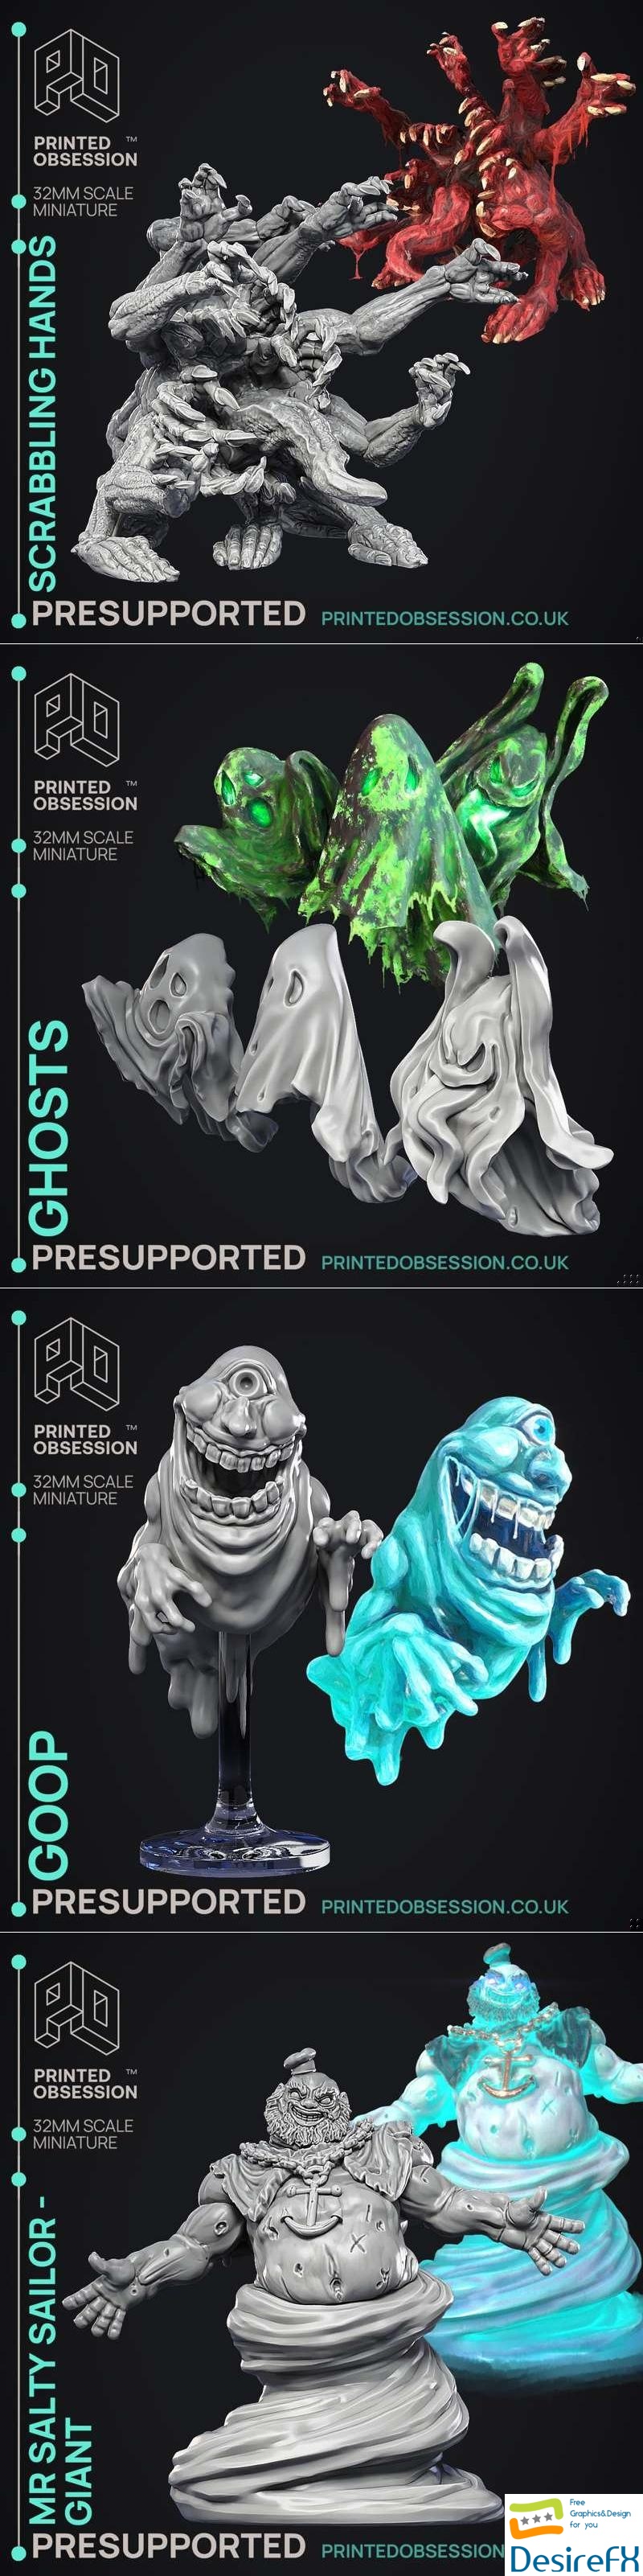 Printed Obsession - Ghastbusters February 2024 3D Print